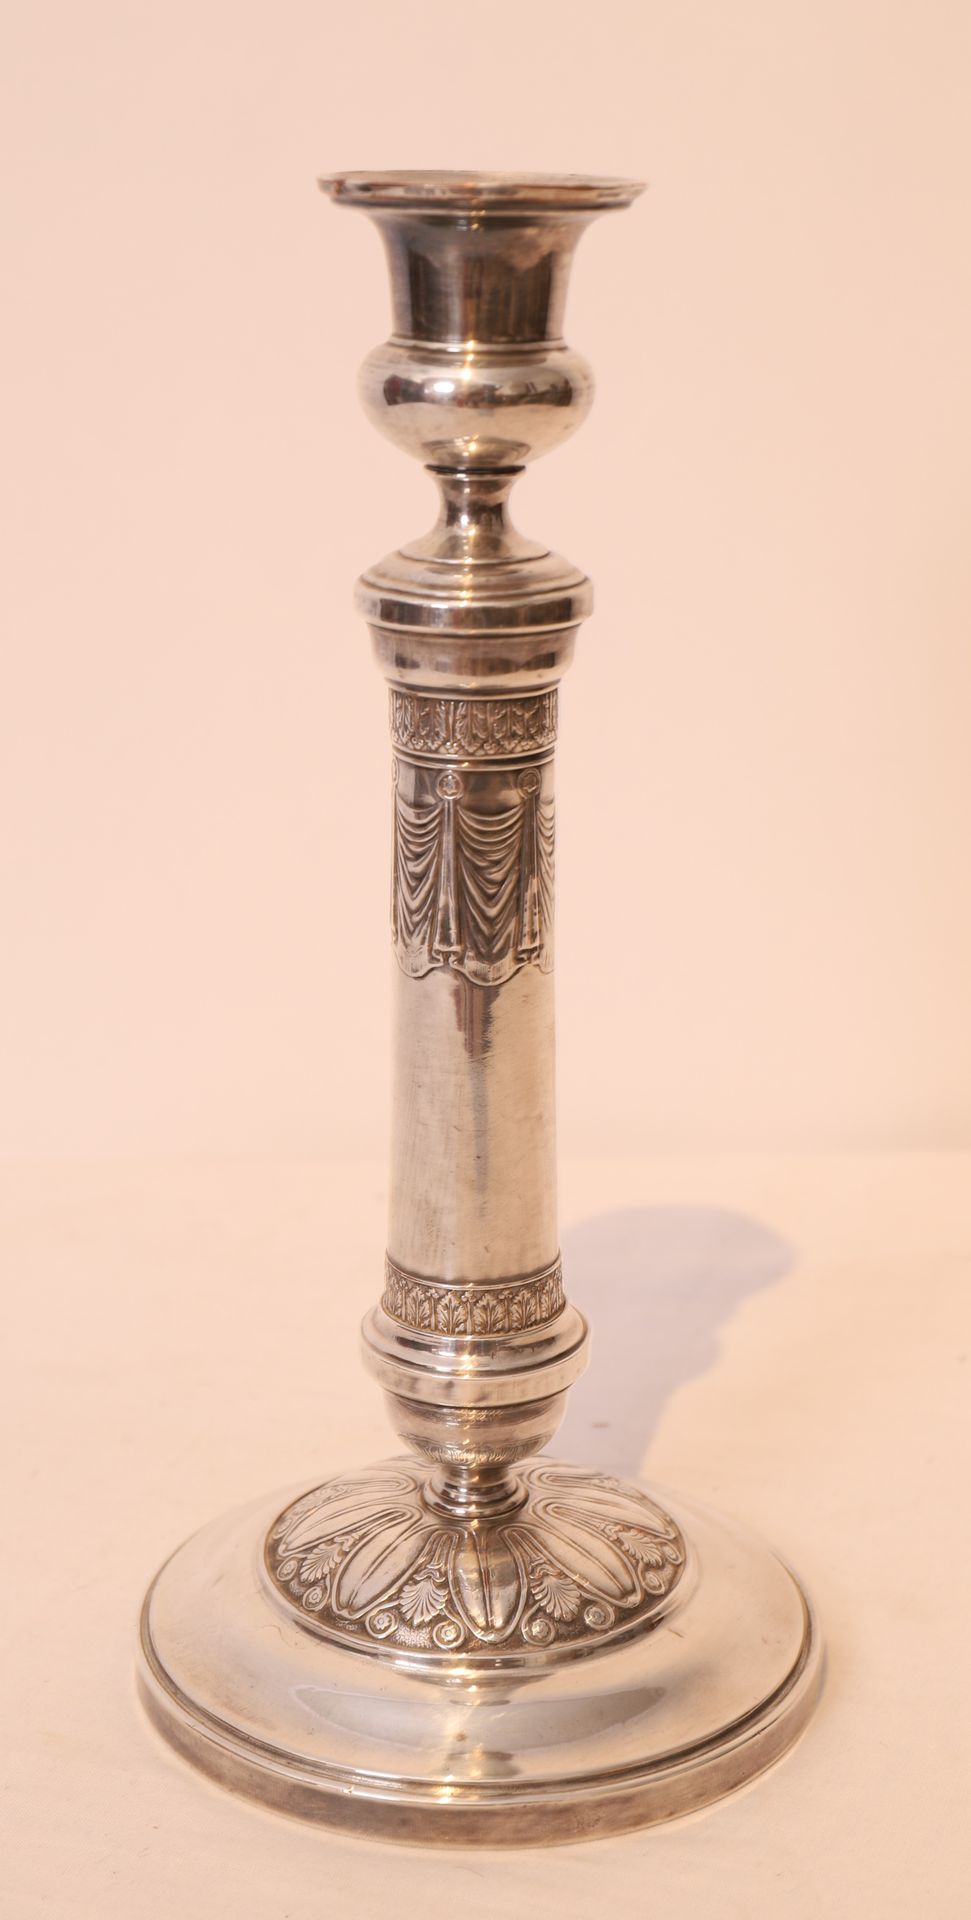 Null CANDLESTICK IN SILVER PLATED COPPER

Decorated with palmettes, scrolls and &hellip;